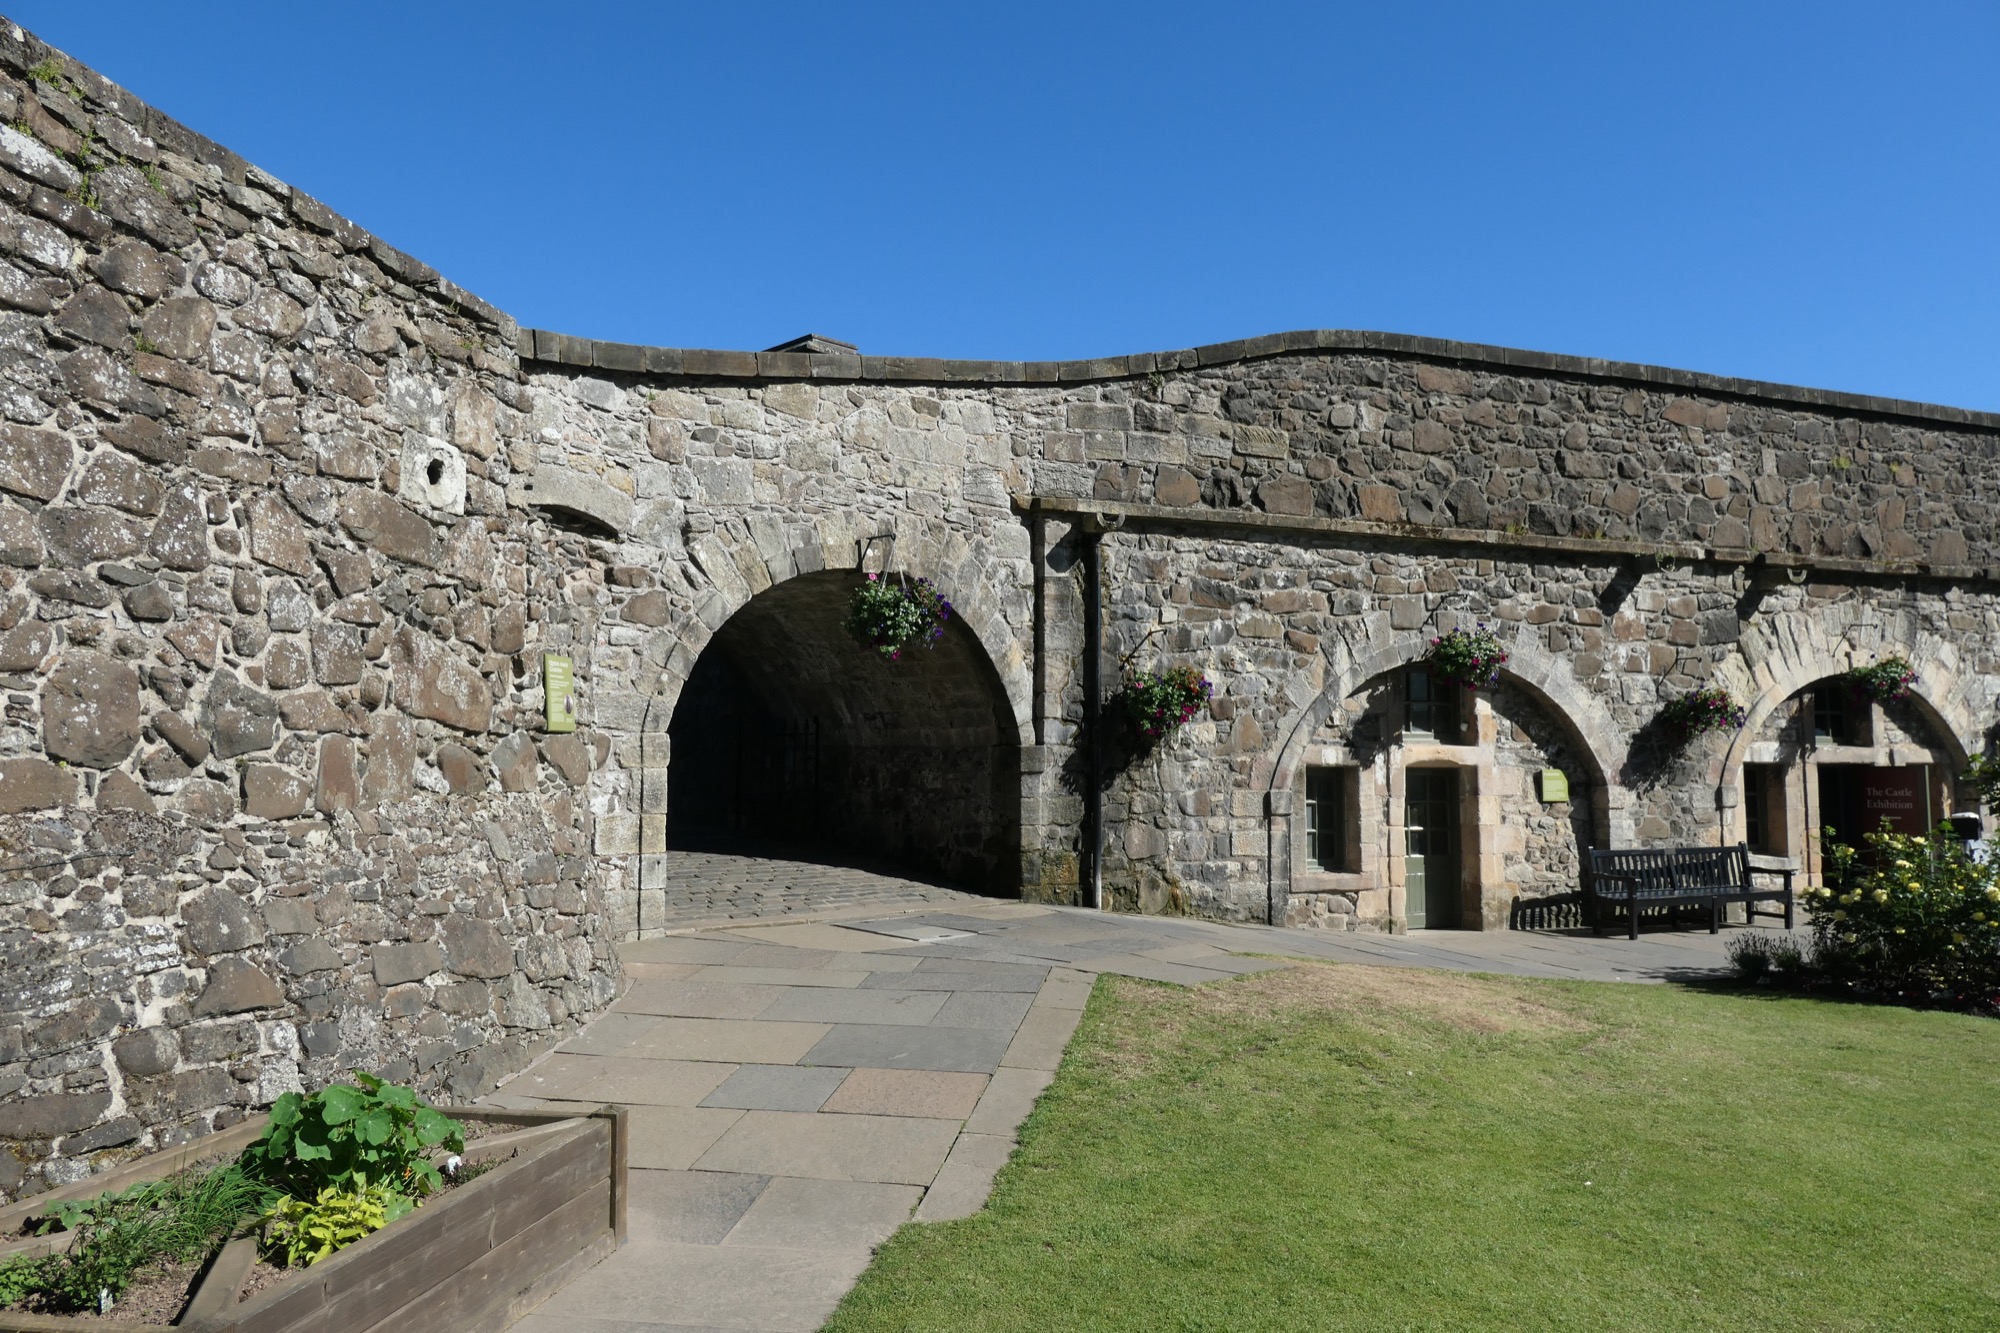 A small tunnel at the entrance of Stirling Castle.